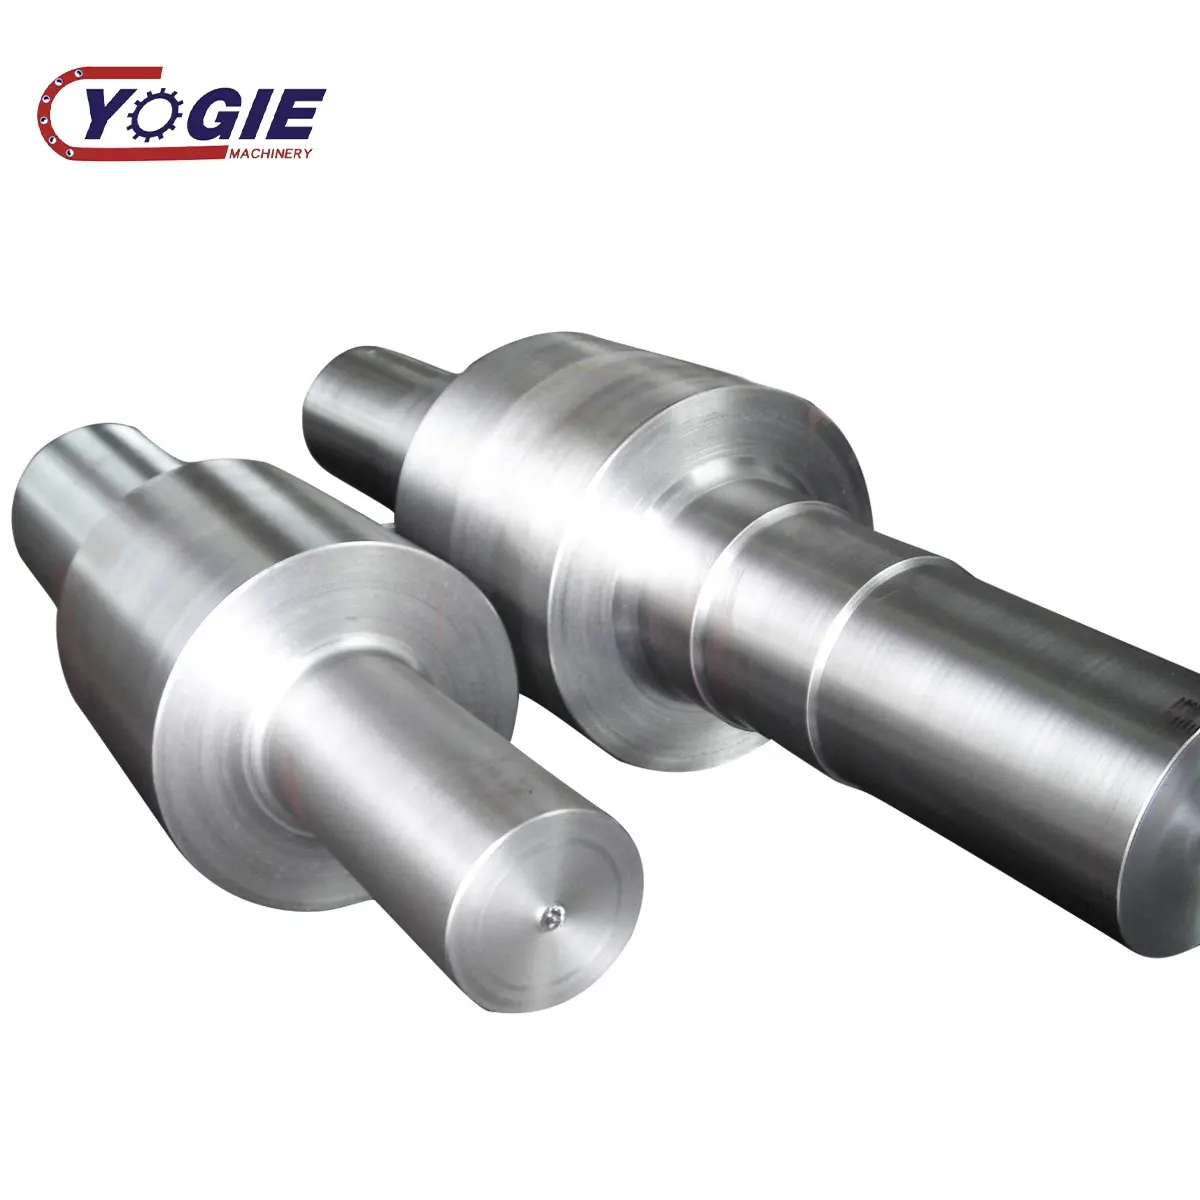 S45C Carbon Steel Forged Kiln Rotating Roller Shaft